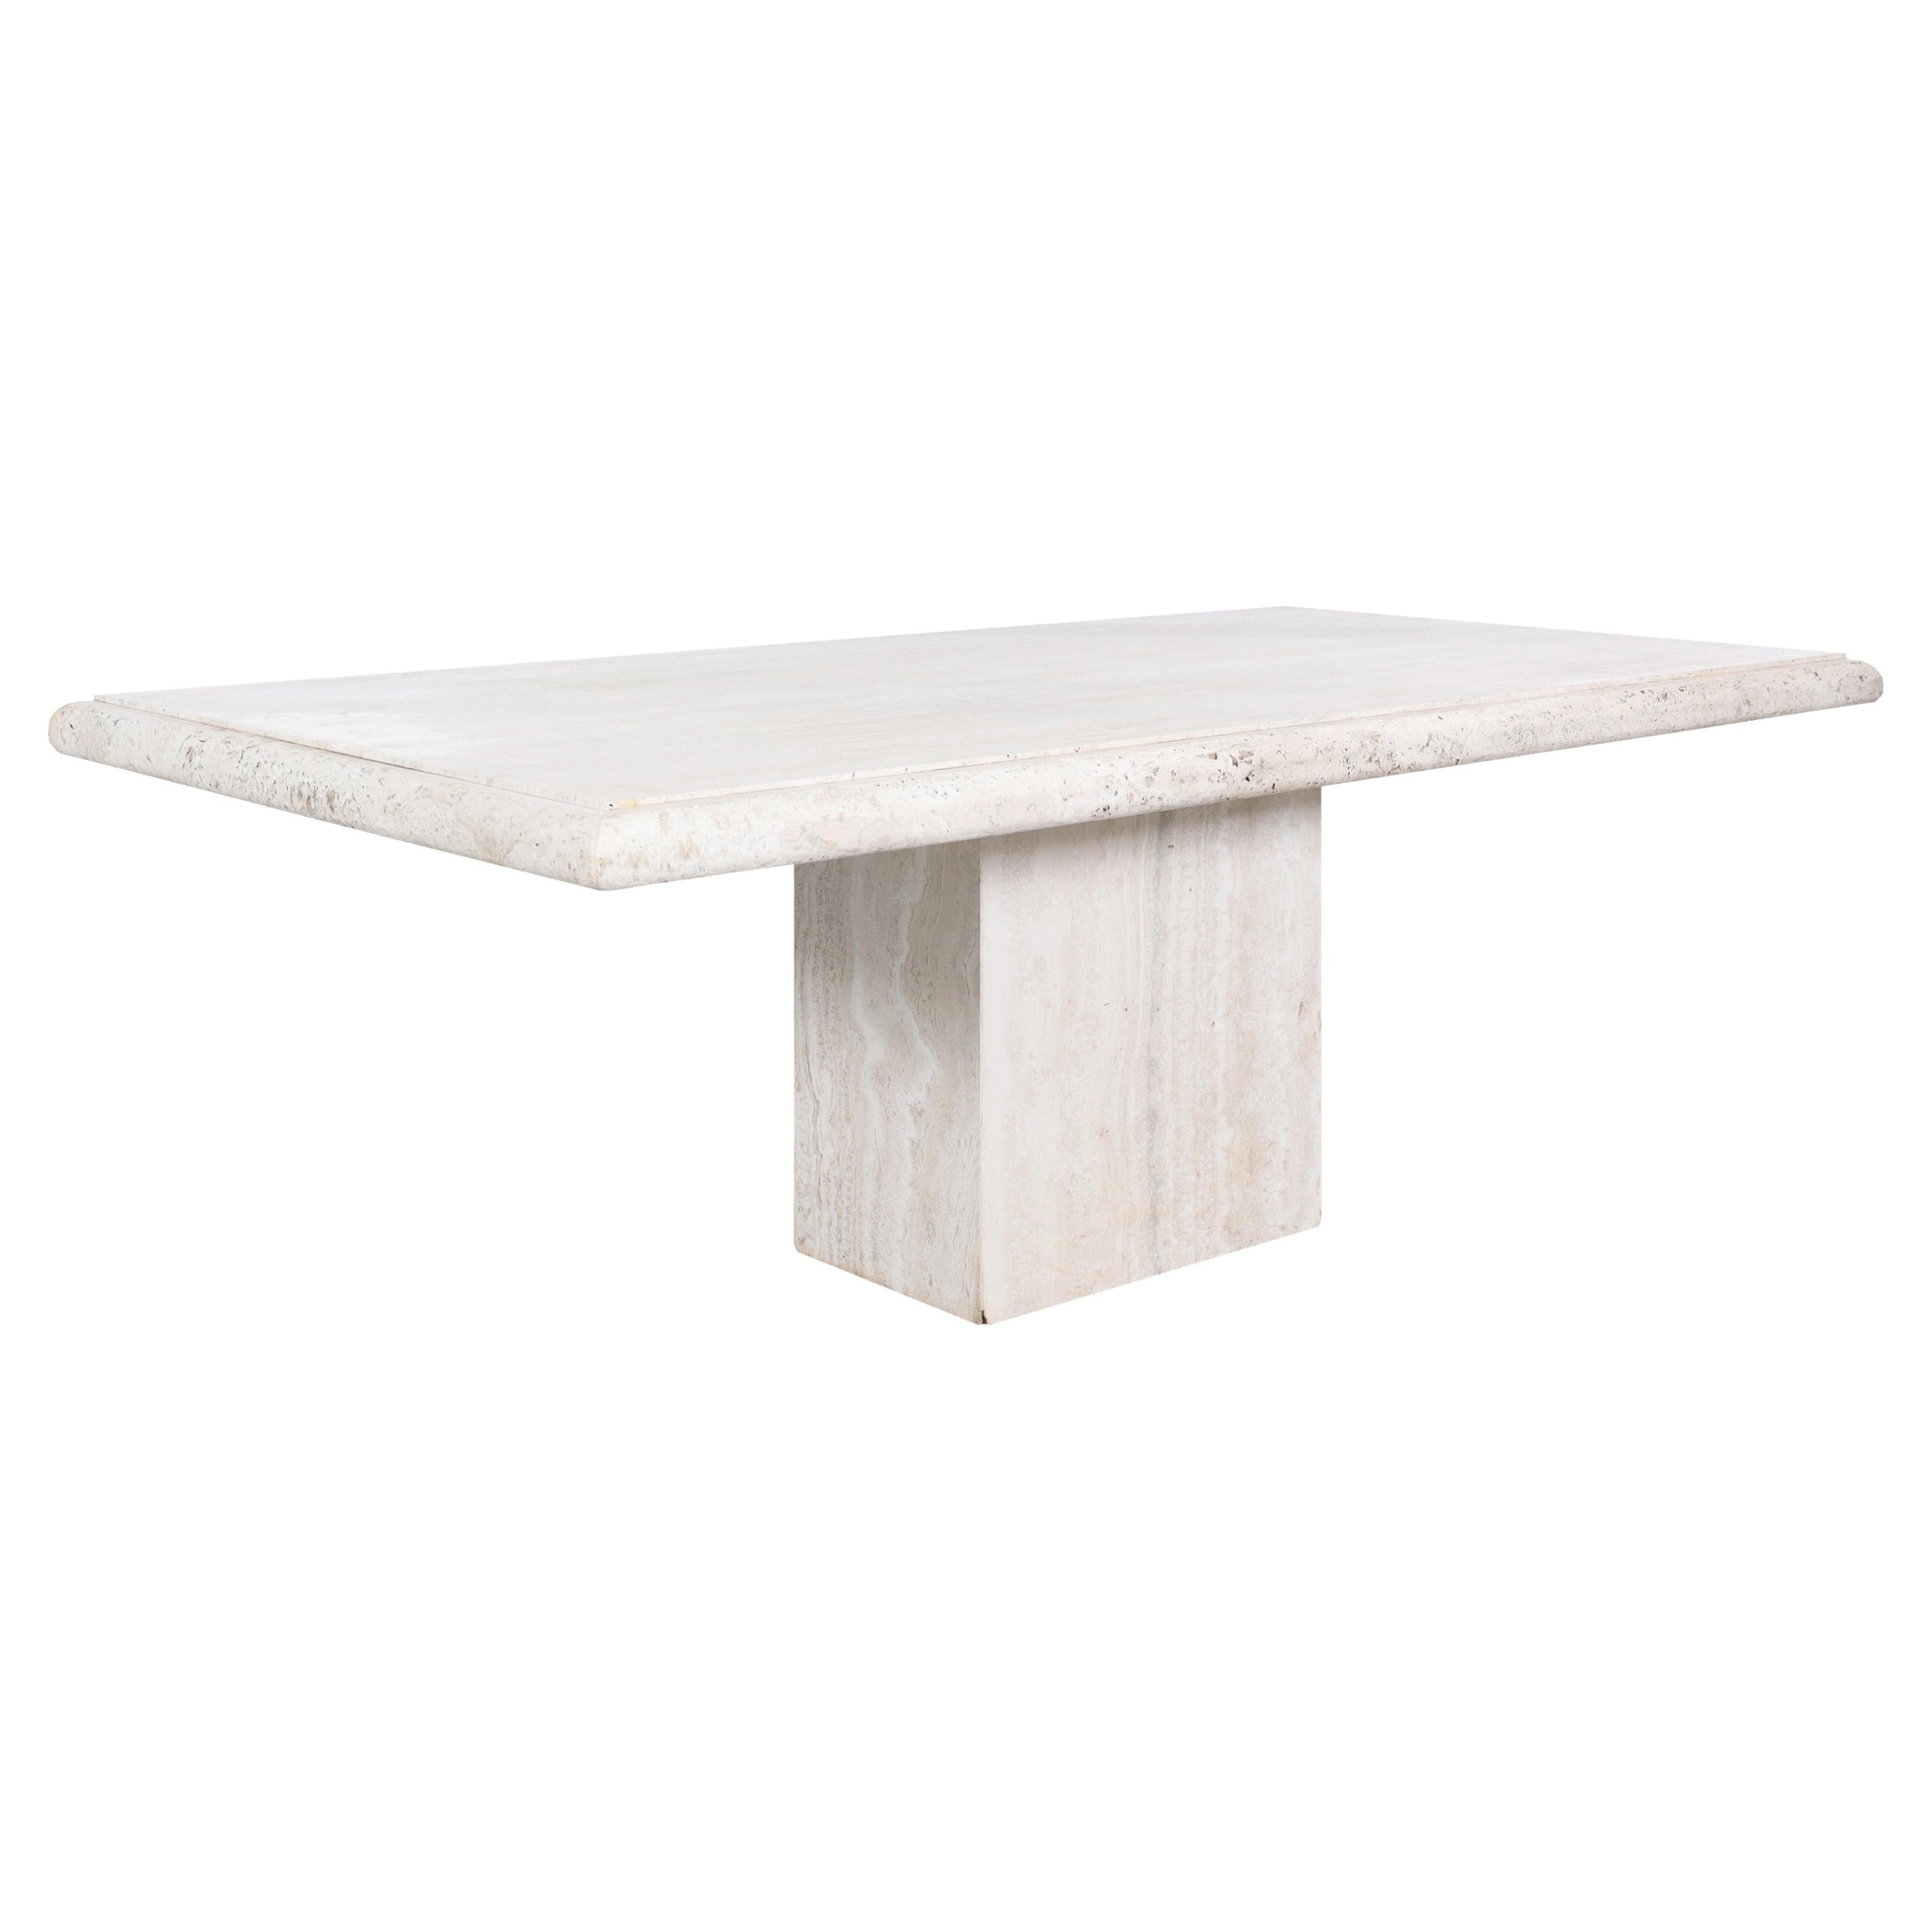 Vintage Italian Travertine Dining Table by Stone International For Sale